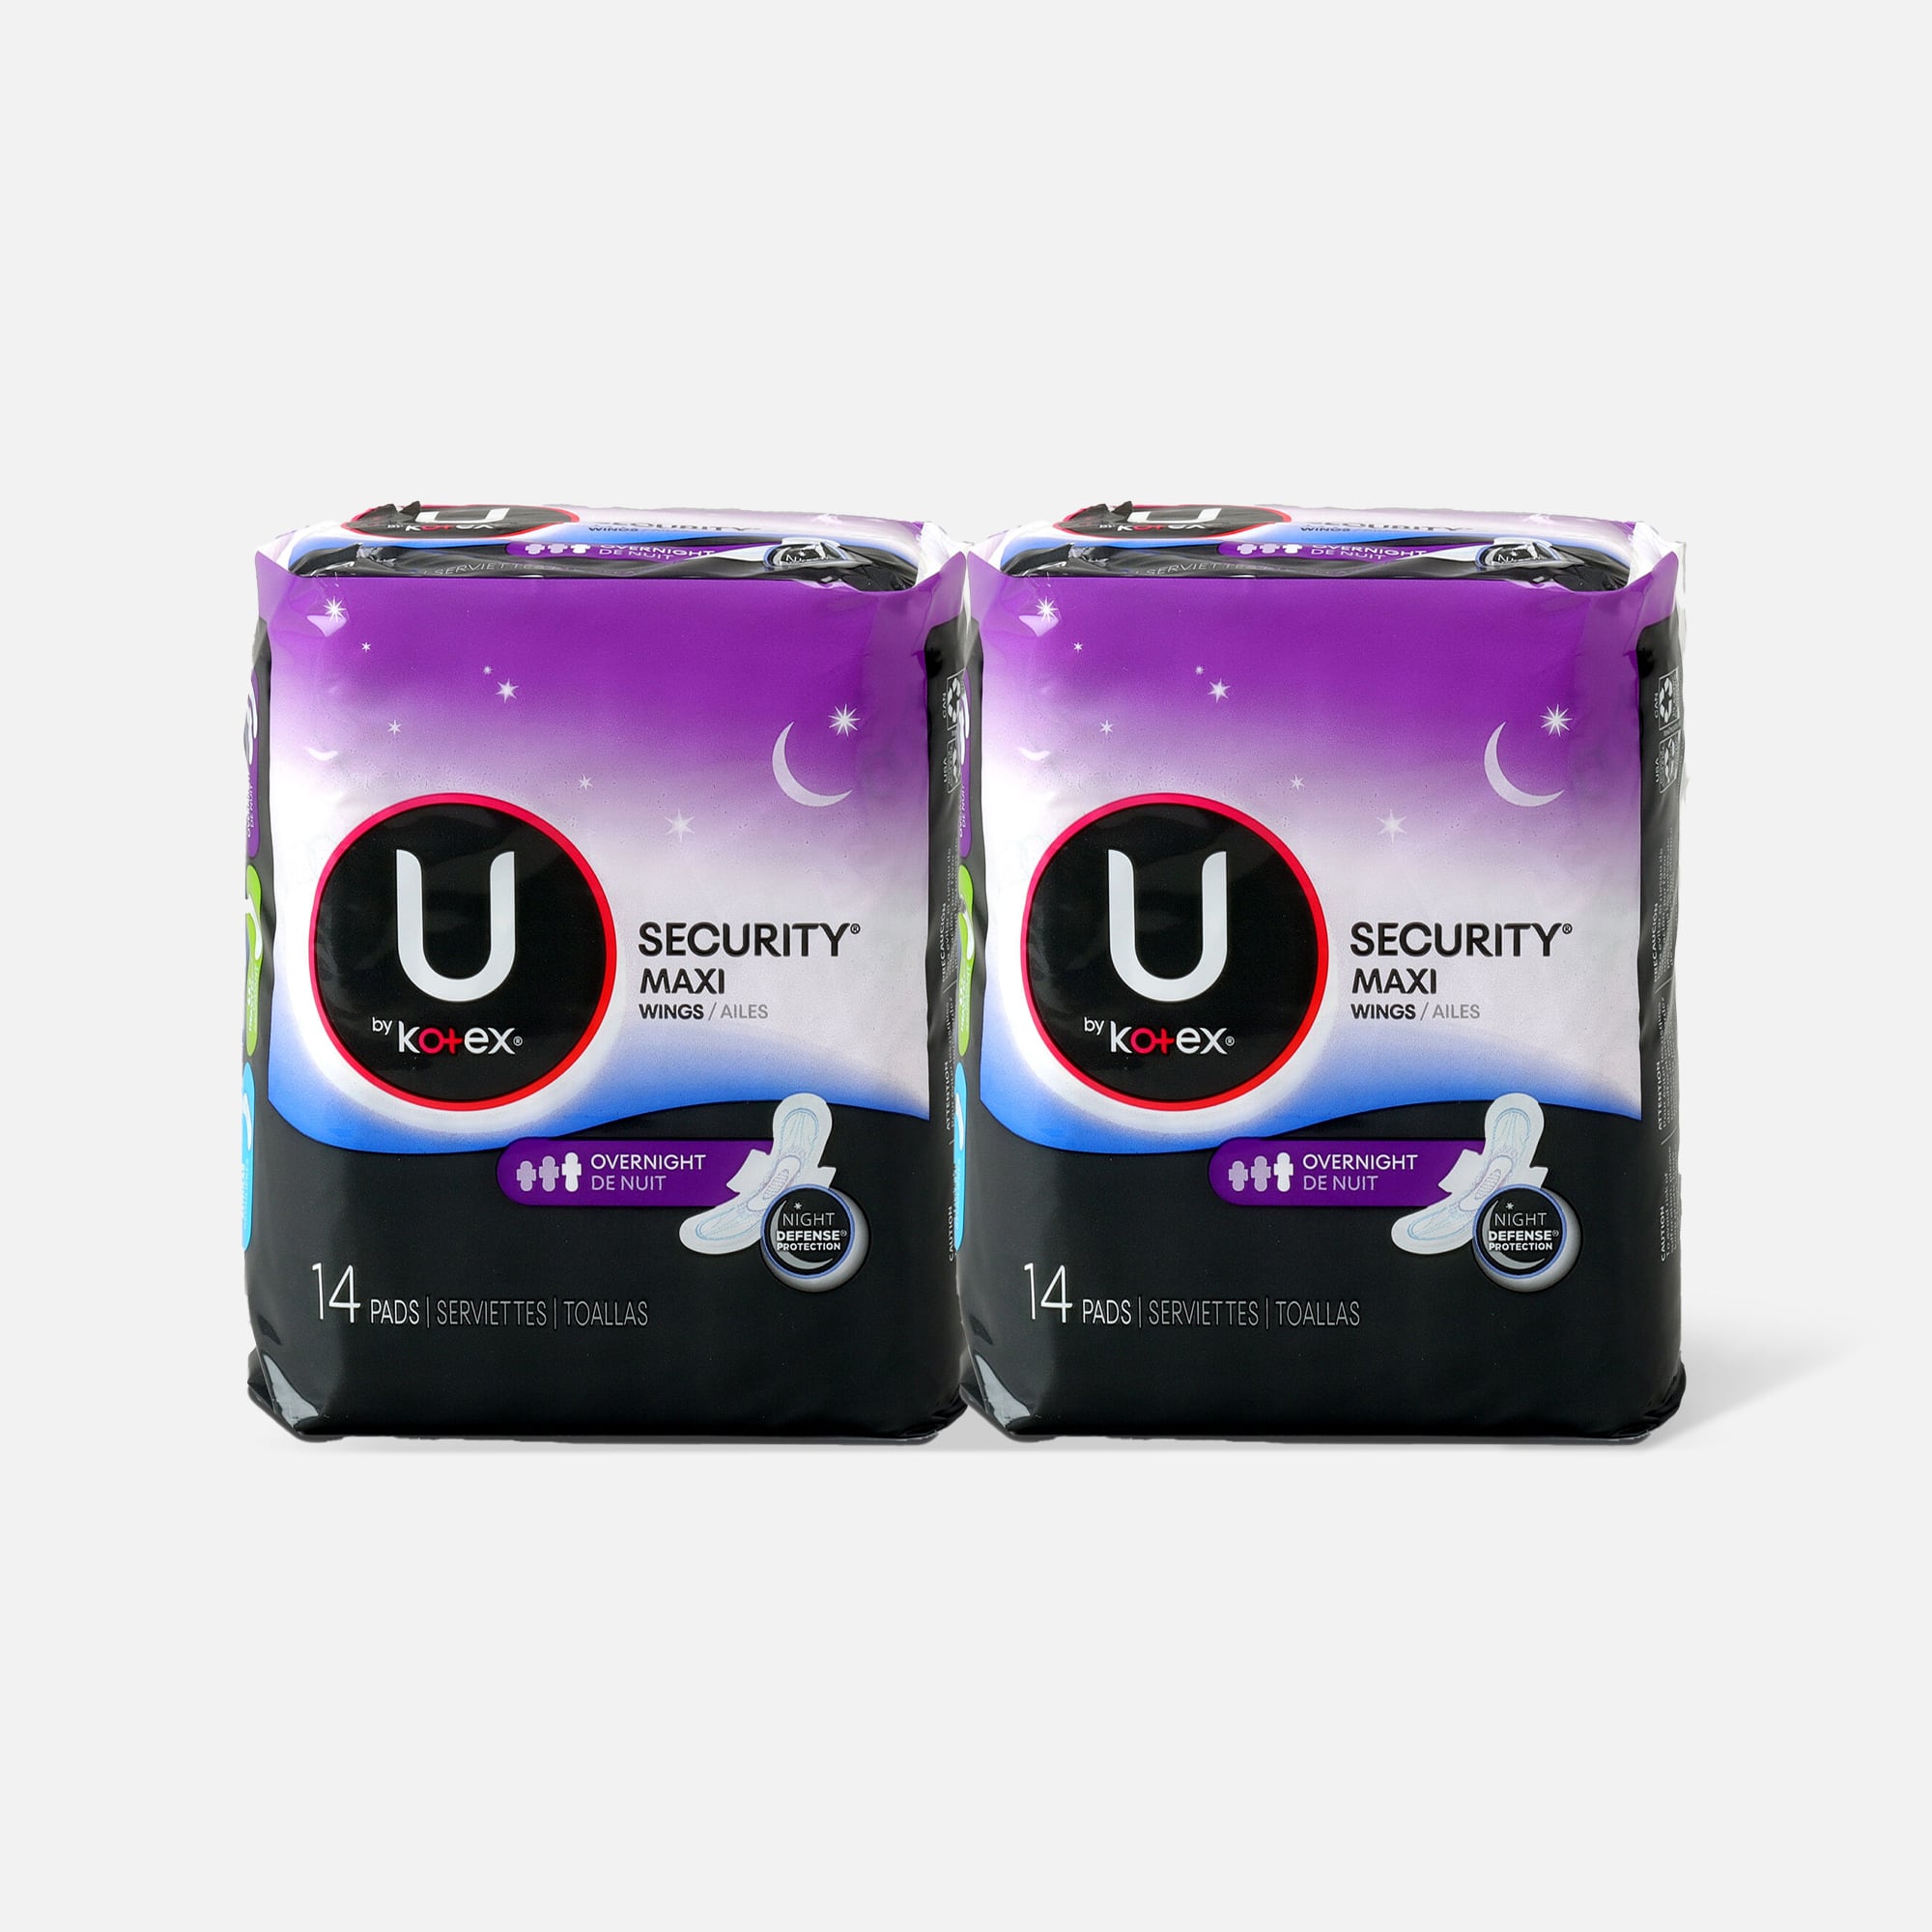 U by Kotex Security Maxi Pad with Wings, Overnight, Unscented, 14 ct.  (2-Pack)